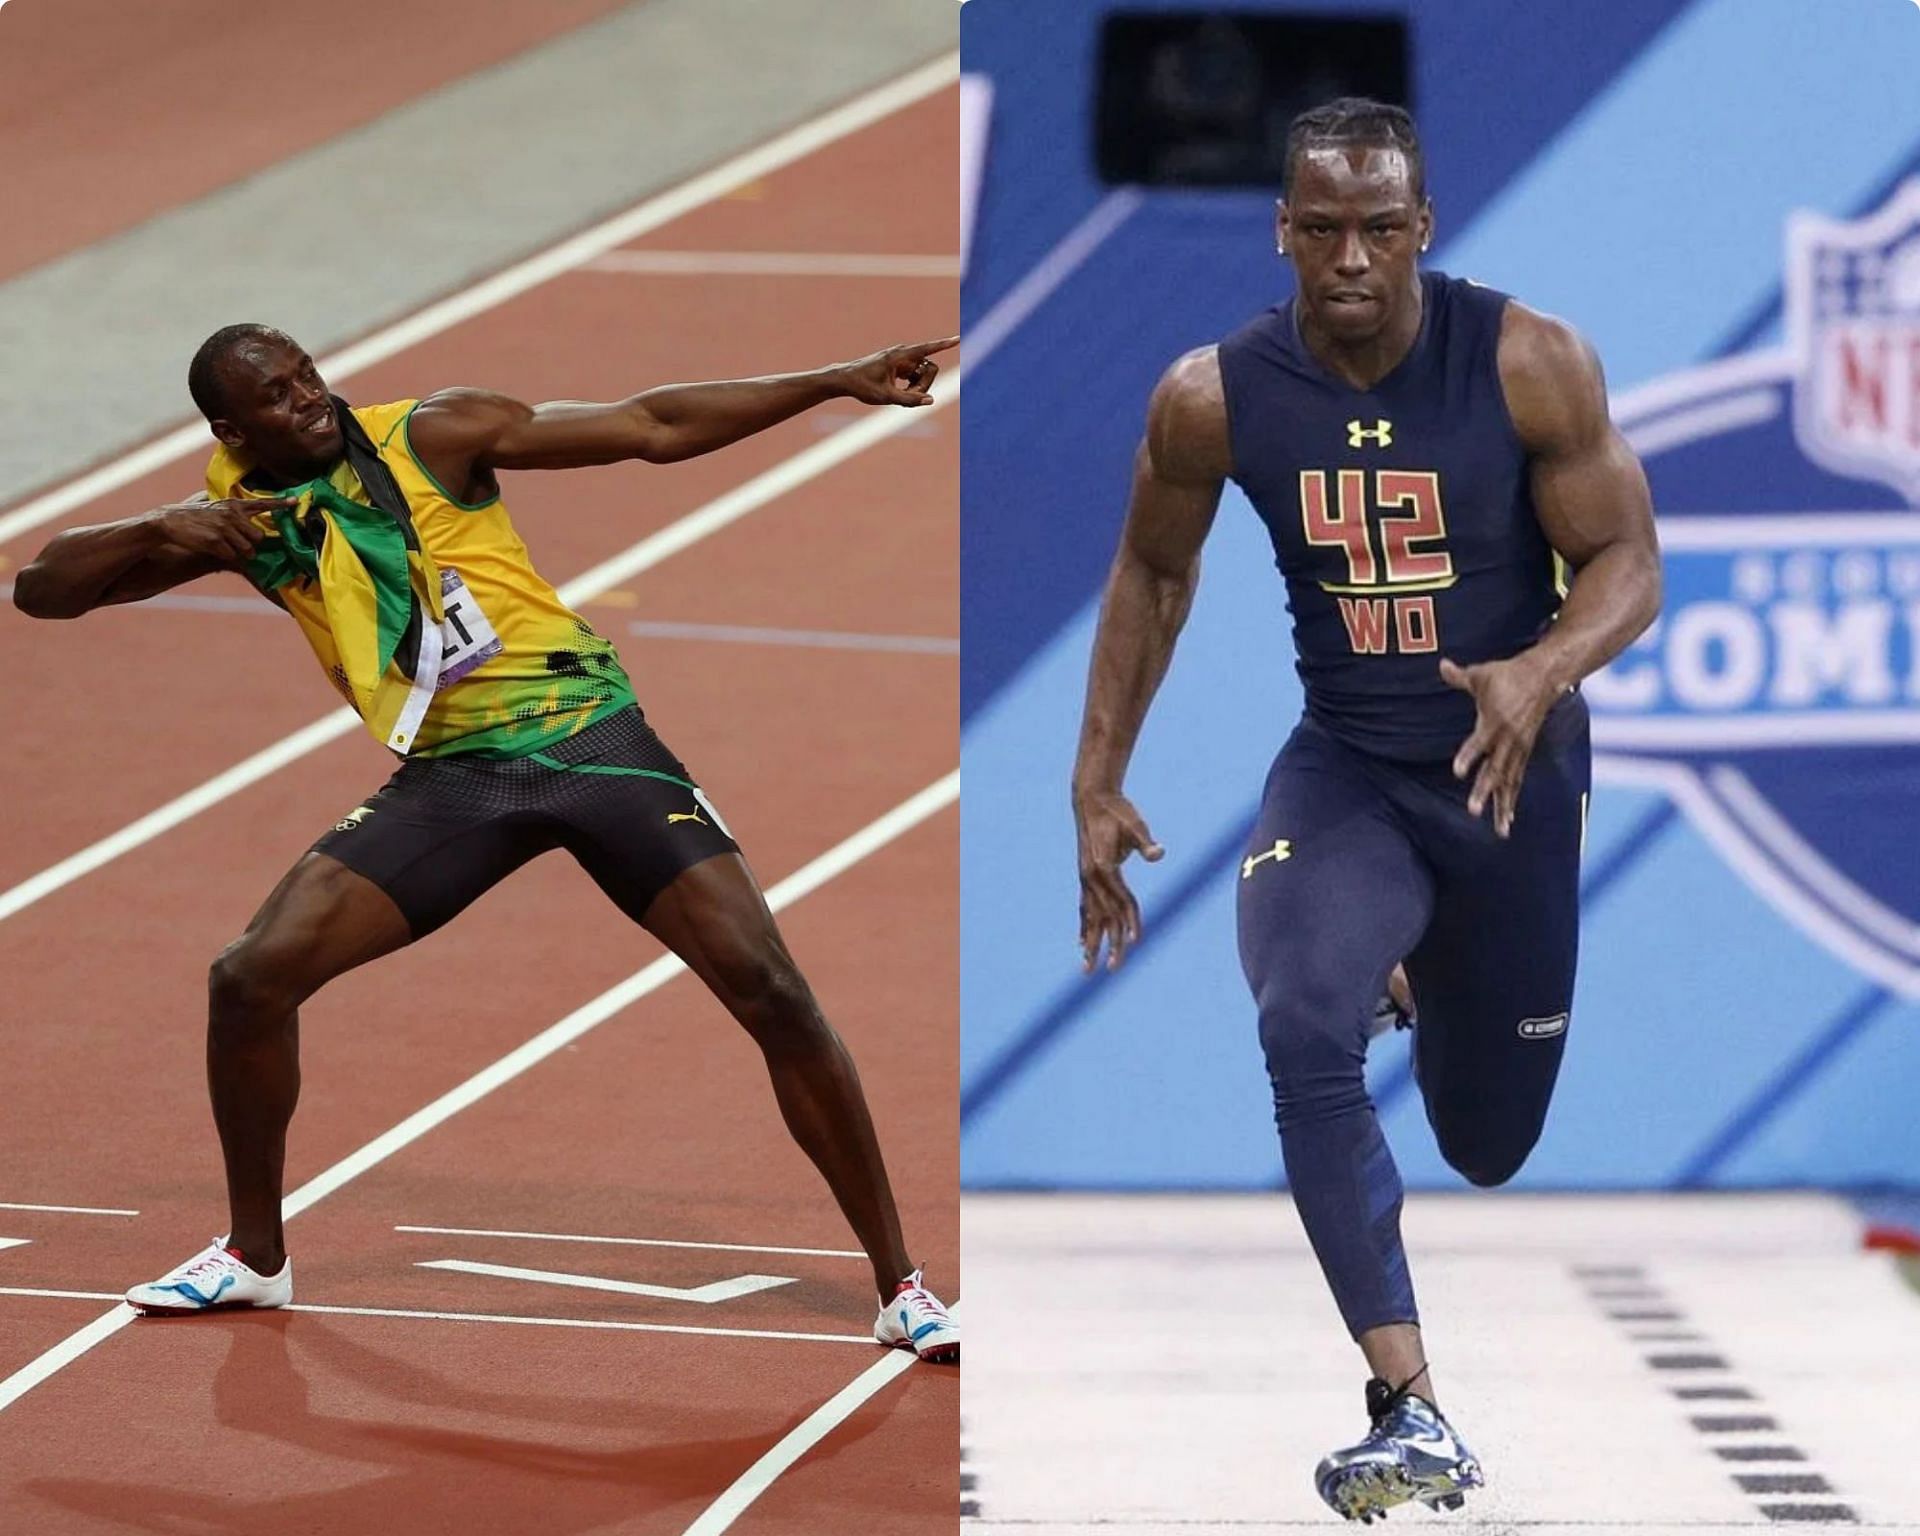 How does the fastest 40-yard dash in NFL Combine history compare to Usain Bolt